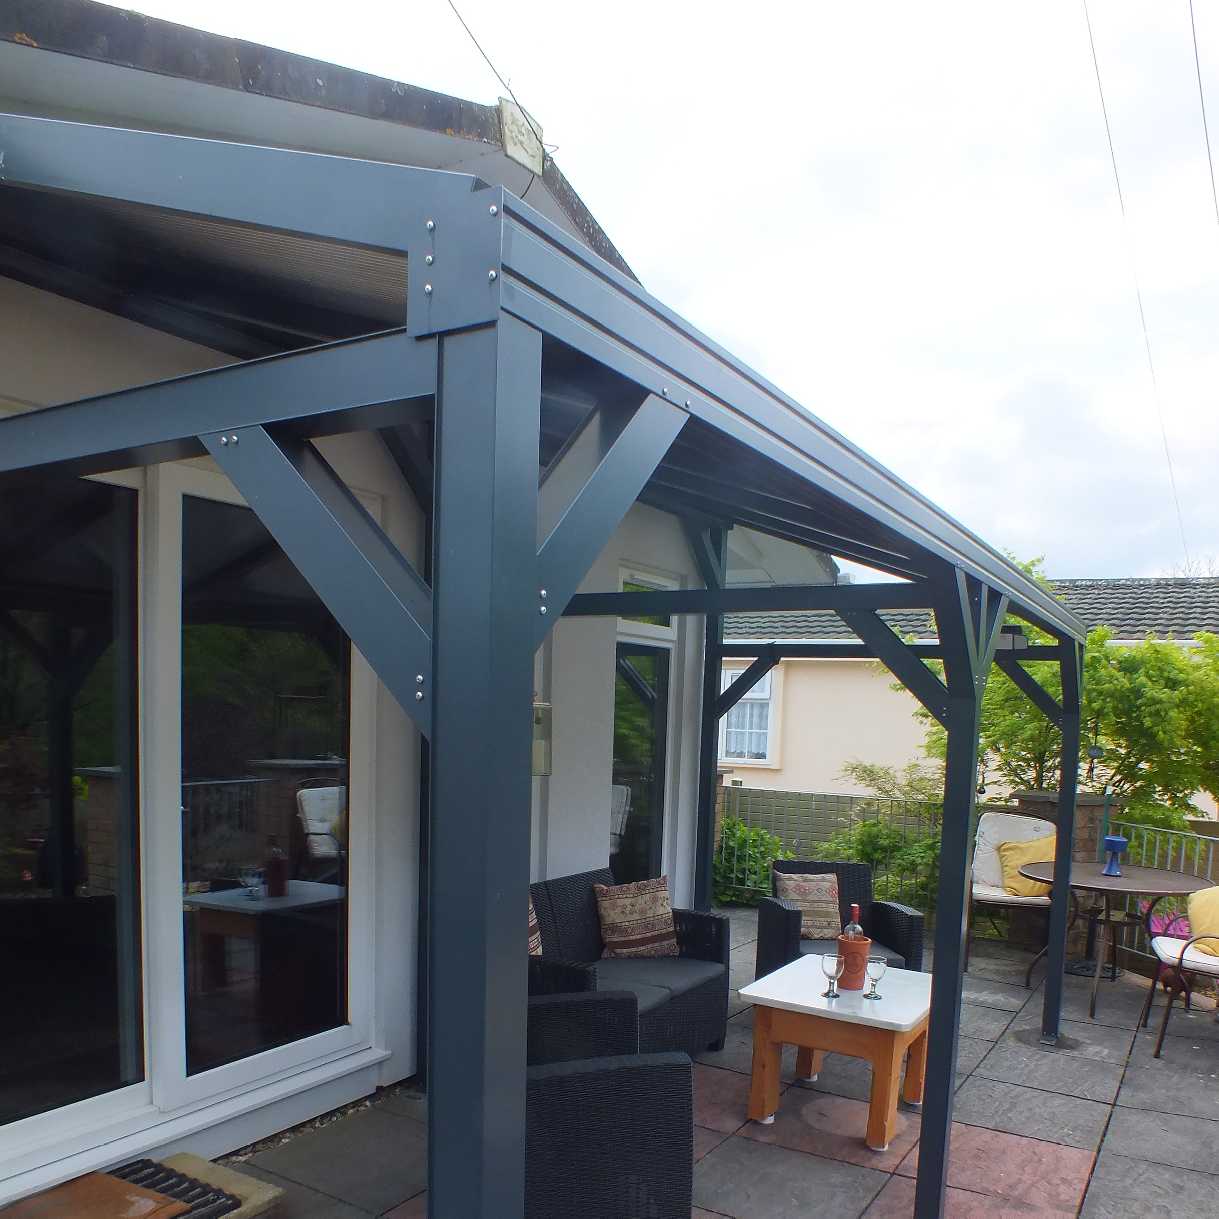 Affordable Omega Smart Free-Standing, Anthracite Grey MonoPitch Roof Canopy with 16mm Polycarbonate Glazing - 5.6m (W) x 3.5m (P), (6) Supporting Posts